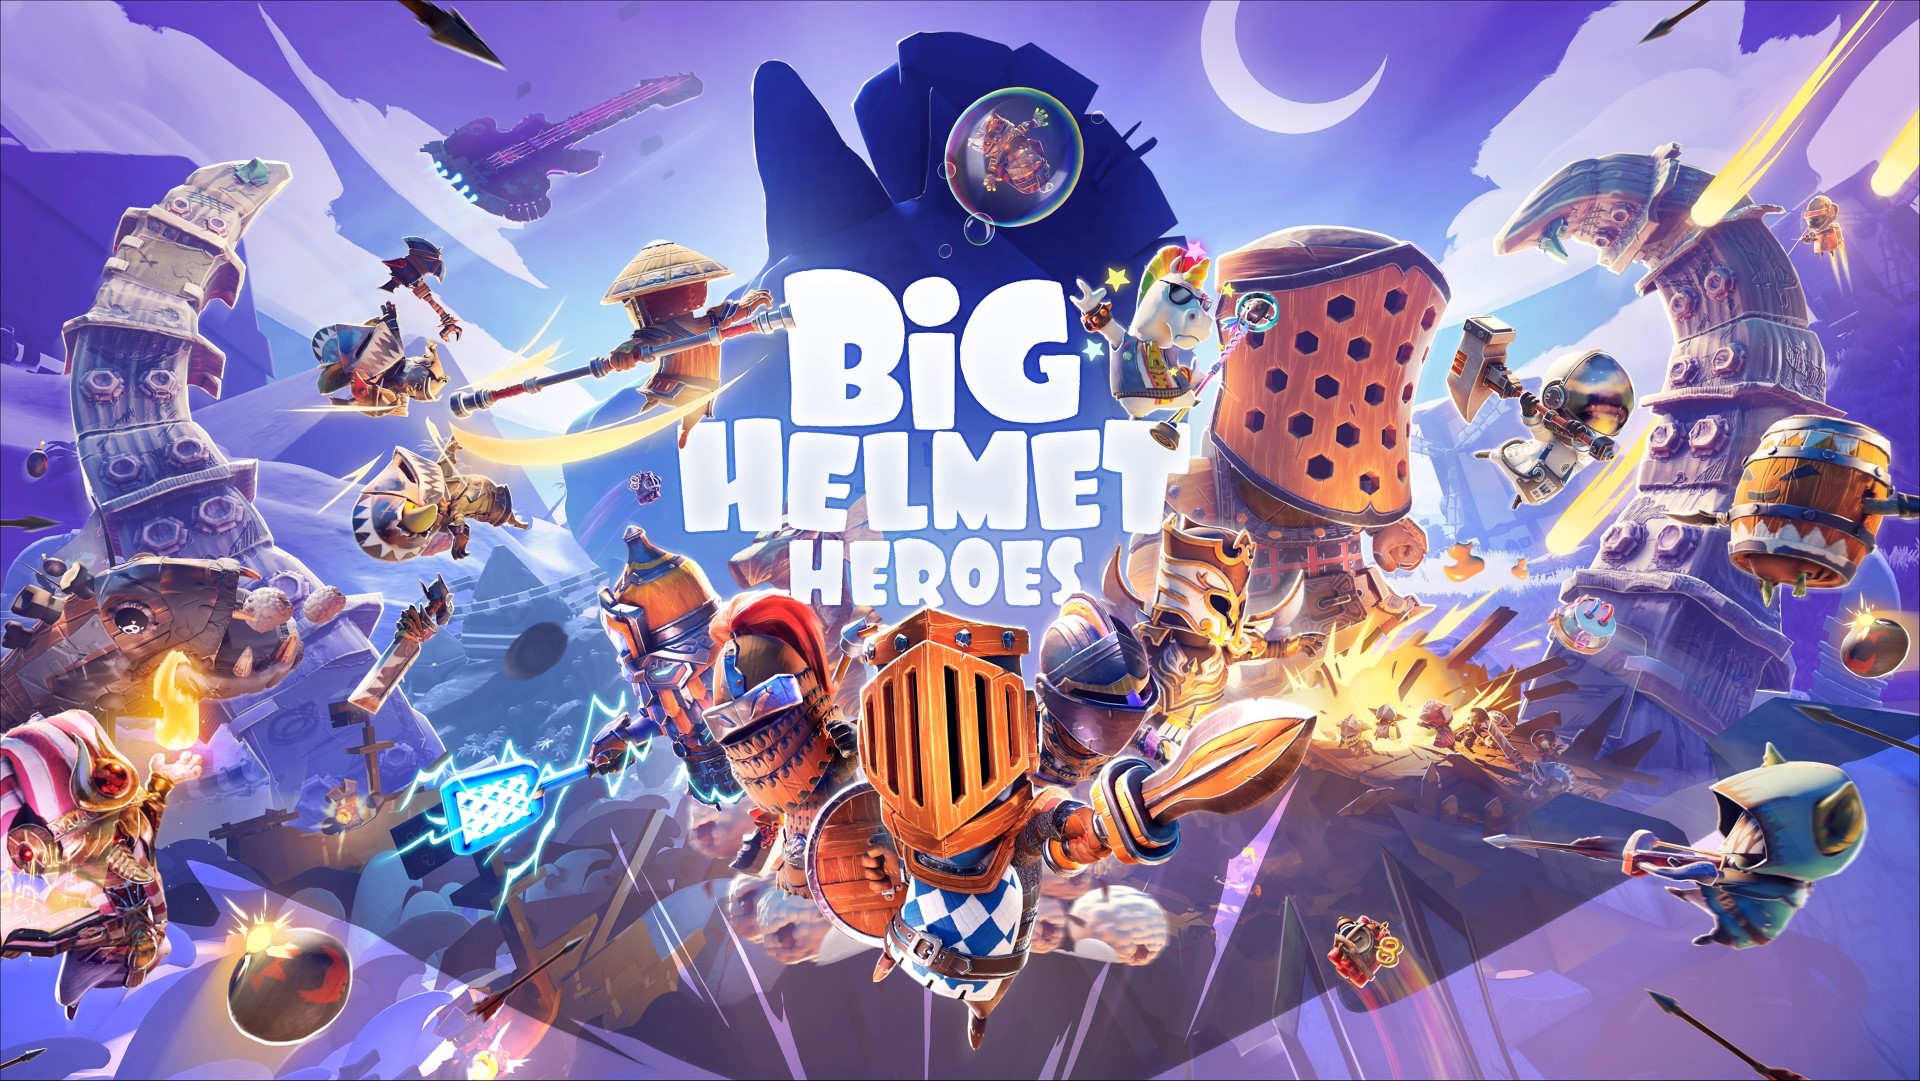 Article image for 3D beat ’em up game Big Helmet Heroes announced